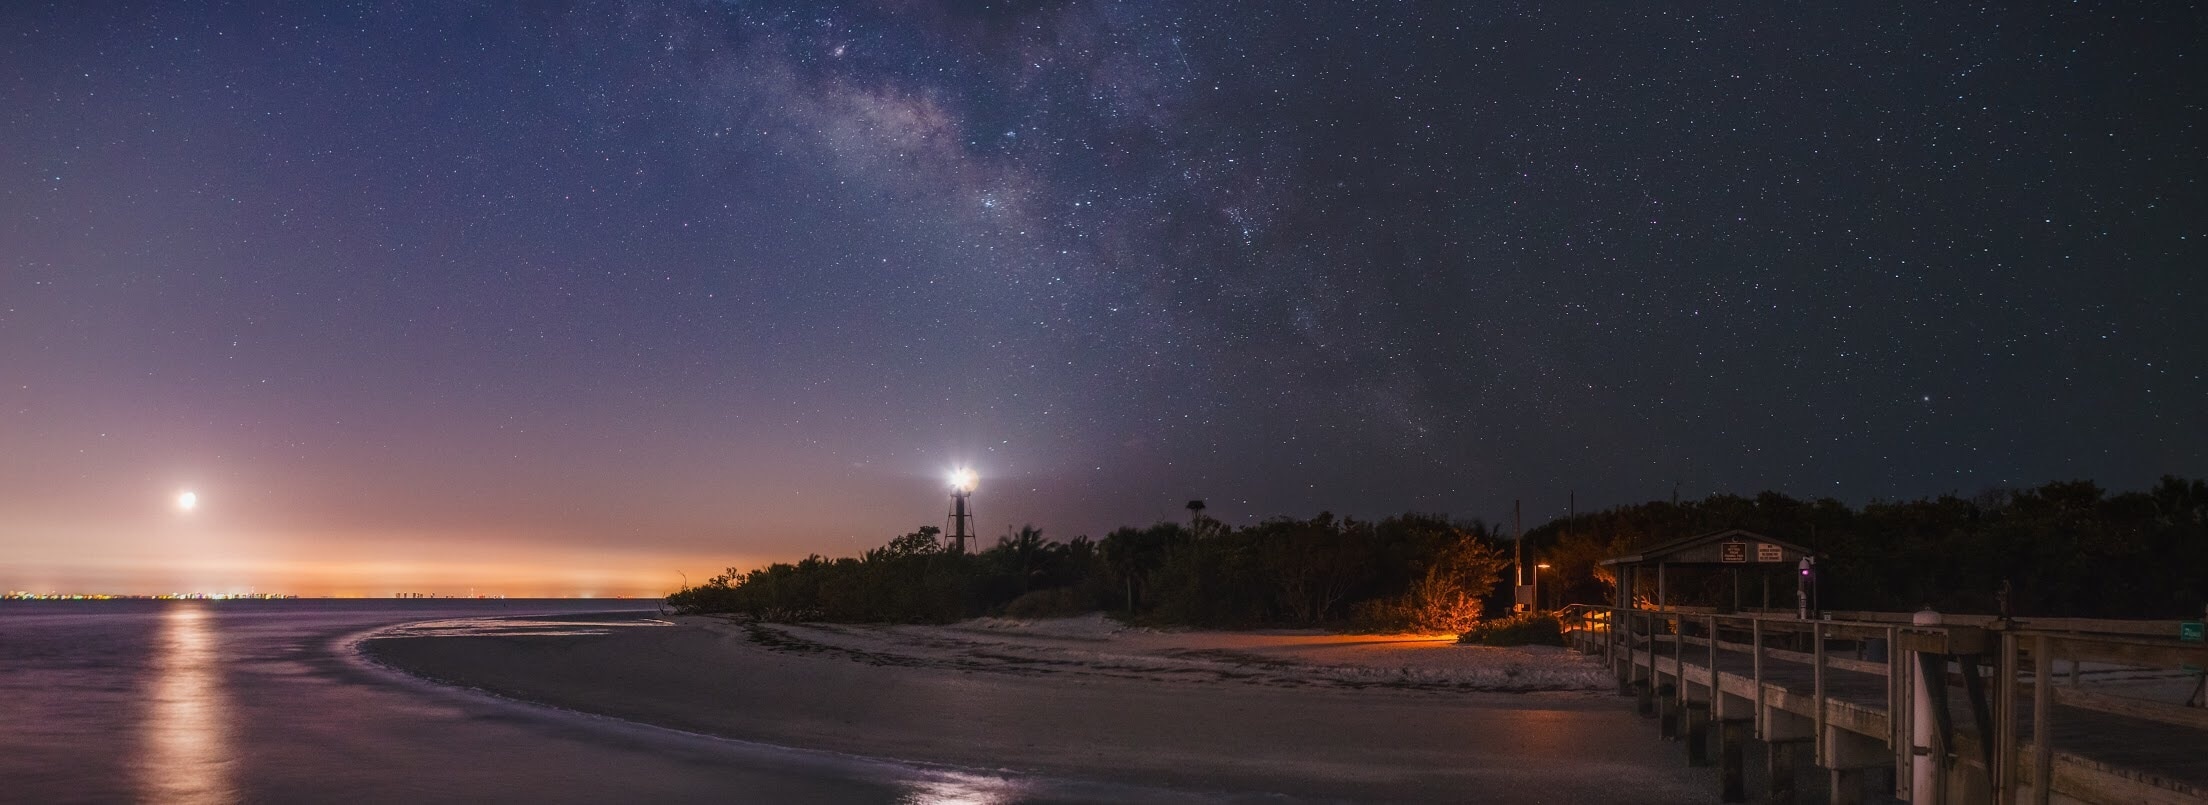 Sanibel Light, Fort Myers, Bonita Springs, and Naples in the background and under the Milky Way.  Taken from the end of the fishing pier. #beachtips